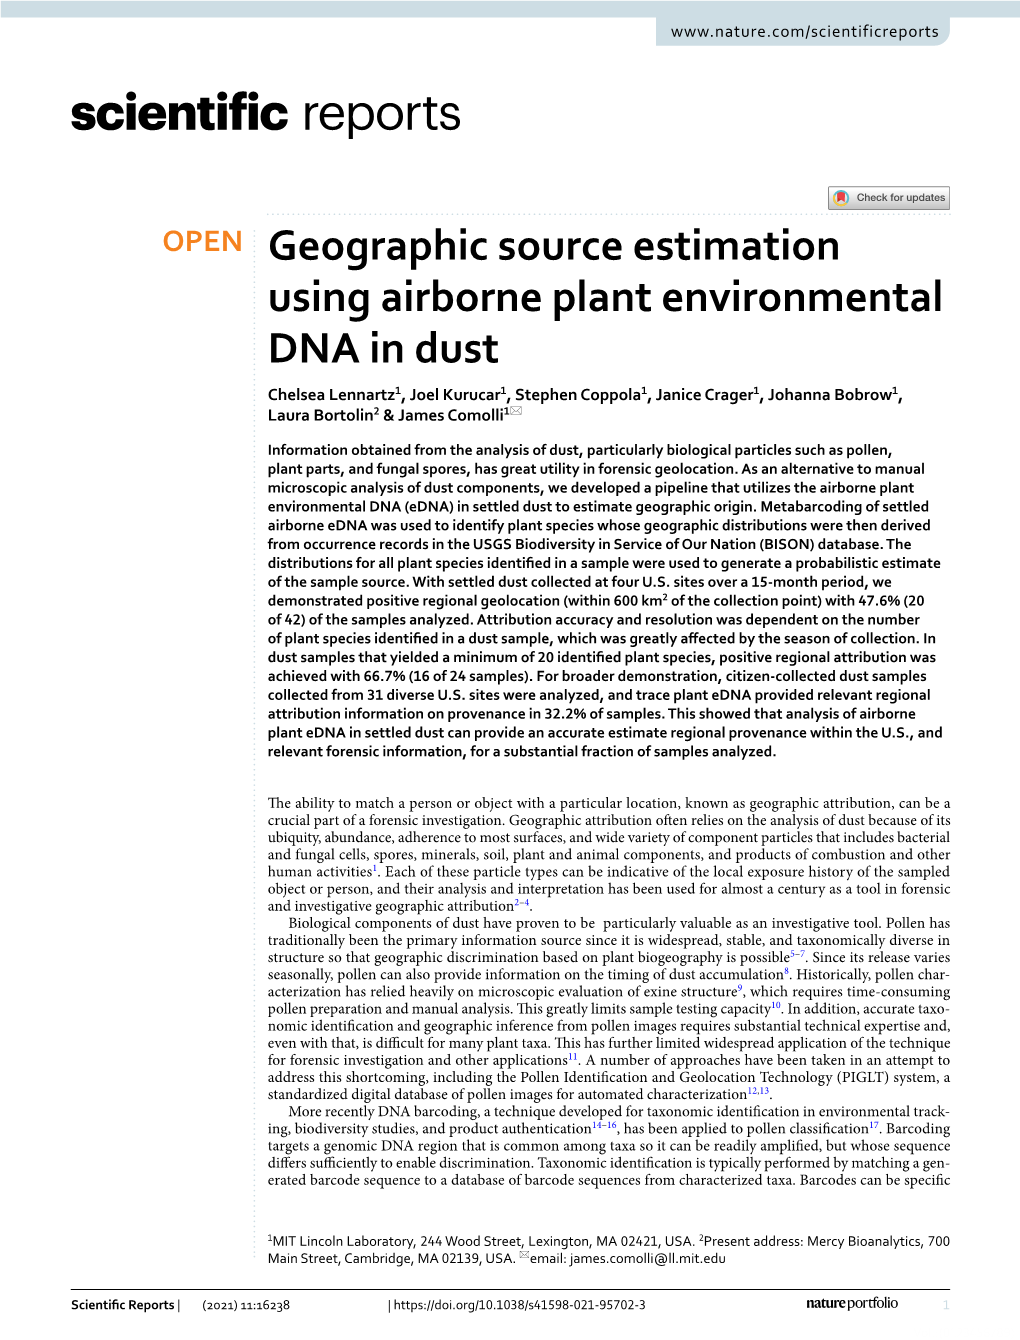 Geographic Source Estimation Using Airborne Plant Environmental DNA